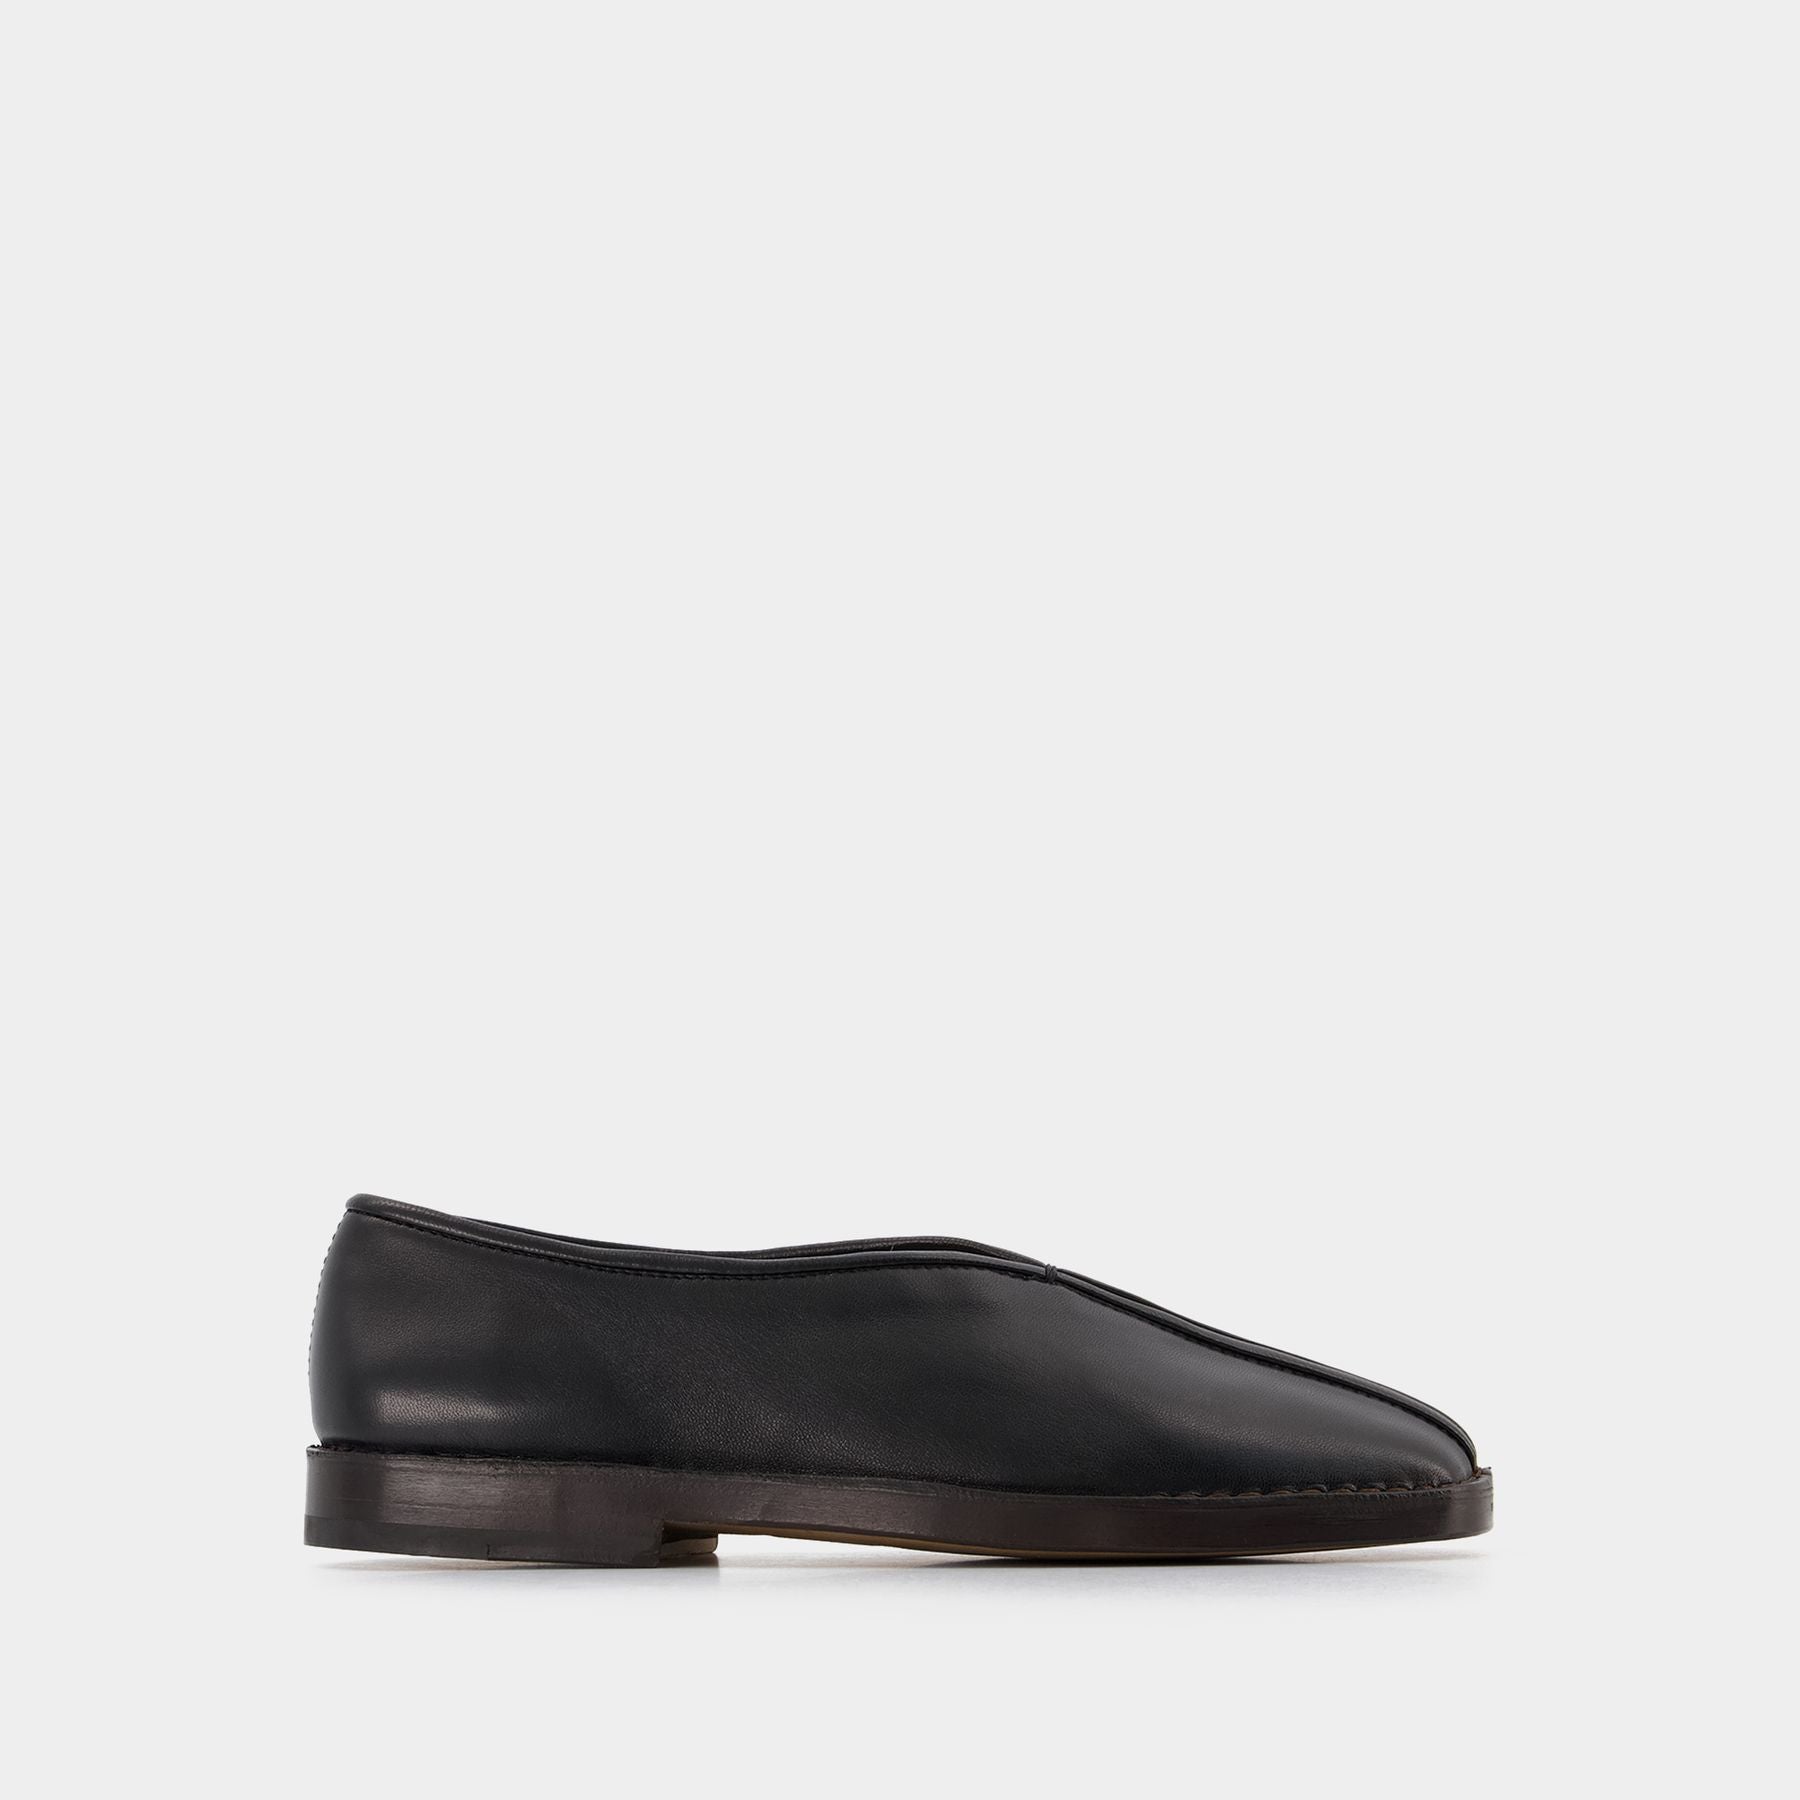 Flat Piped Shoes - Lemaire - Black - Leather